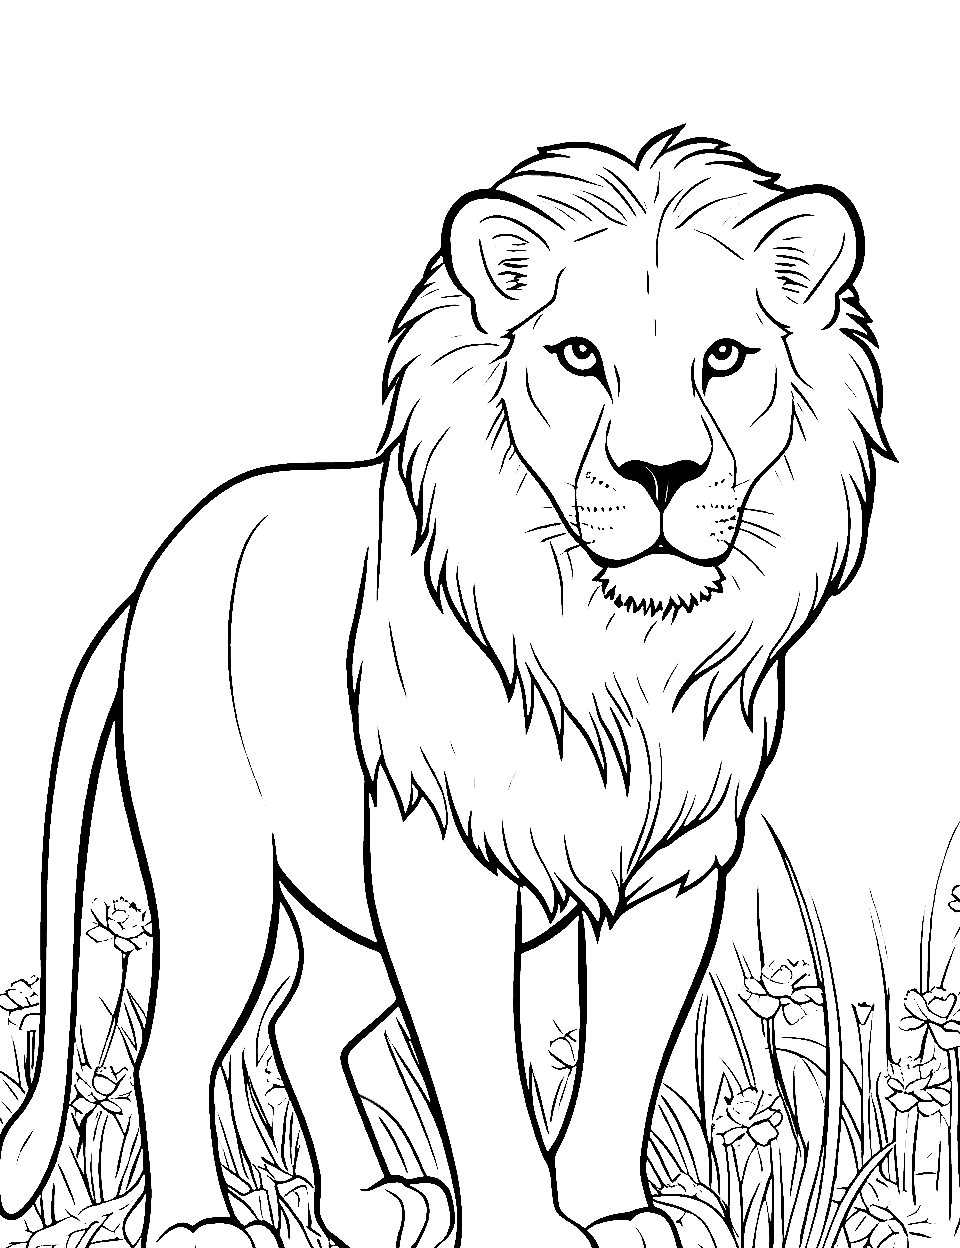 Lion's Majesty Coloring Page - The lion’s regal posture amidst the African grasslands.